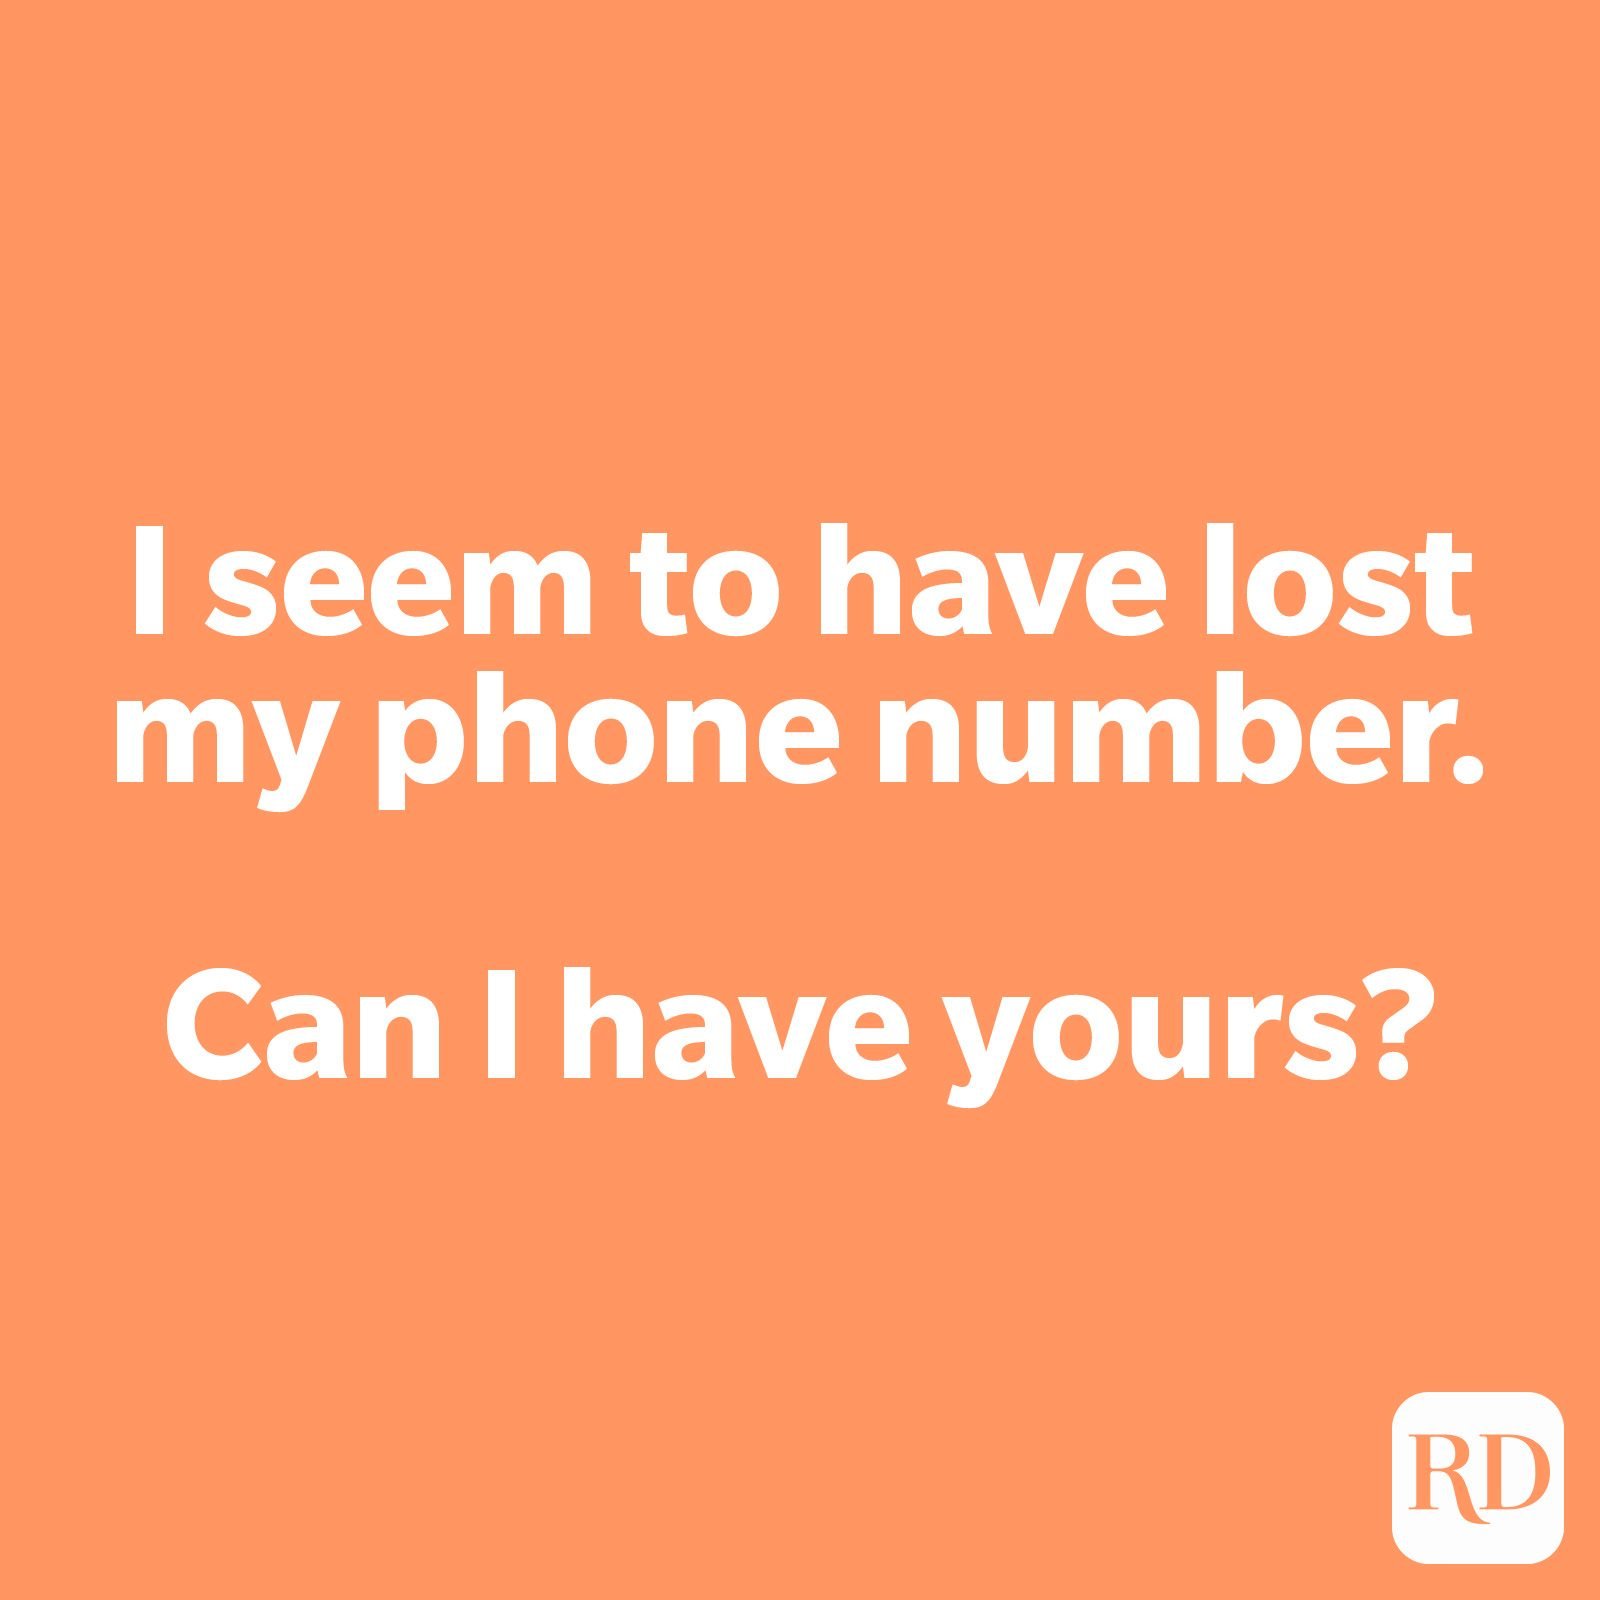 I seem to have lost my phone number. Can I have yours?